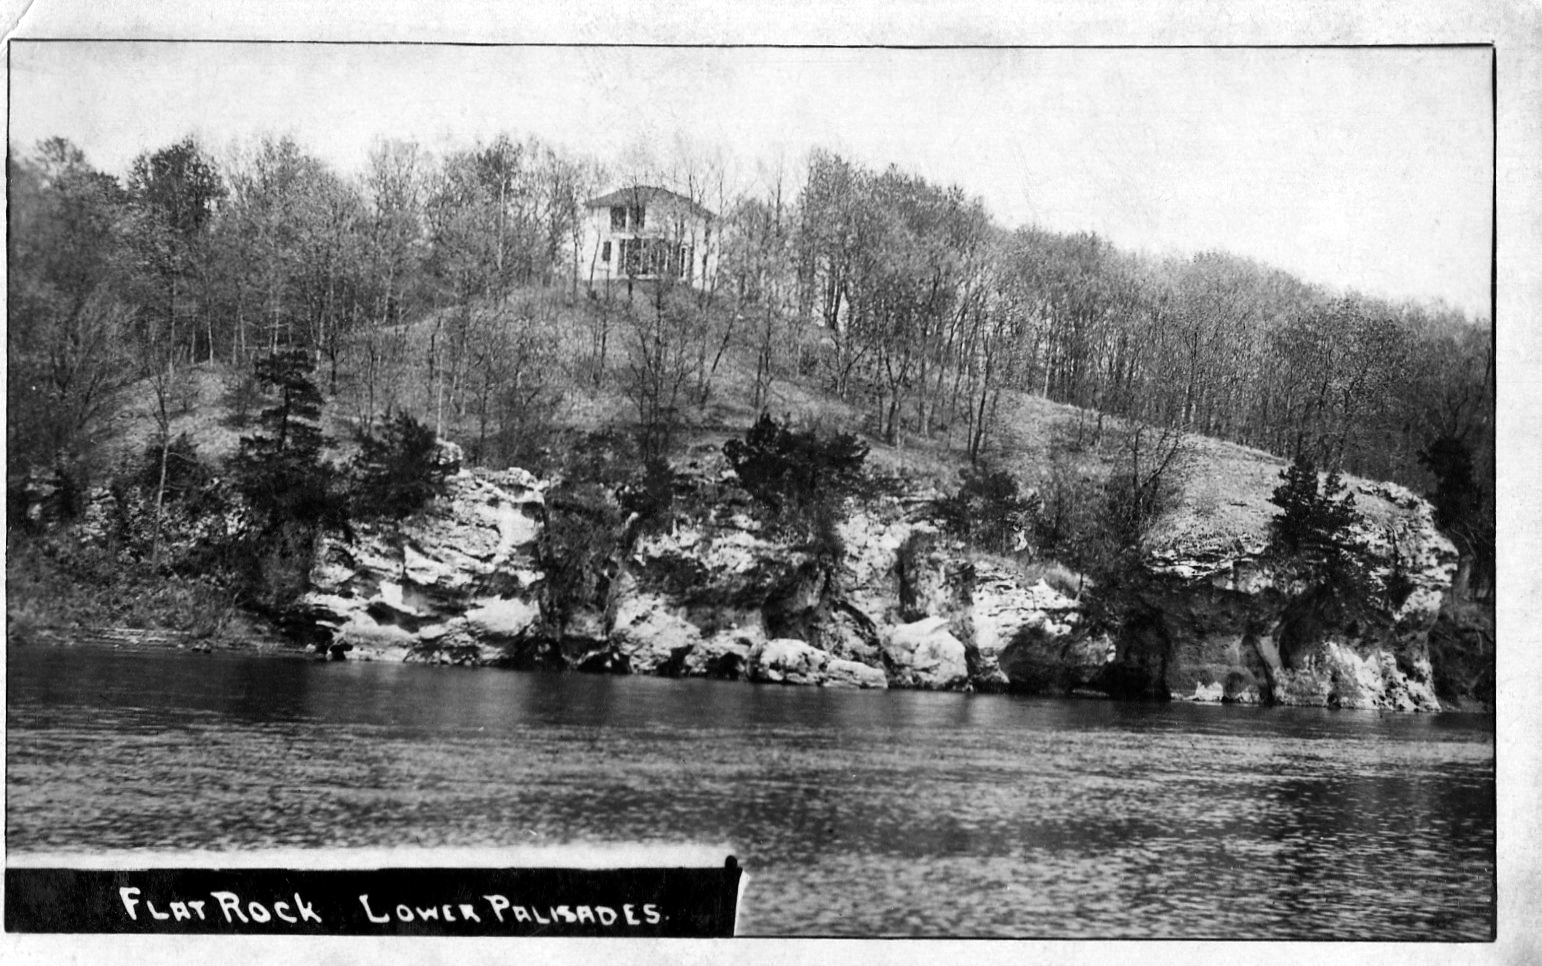 photo of Flat Rock Residence at Lower Palisades